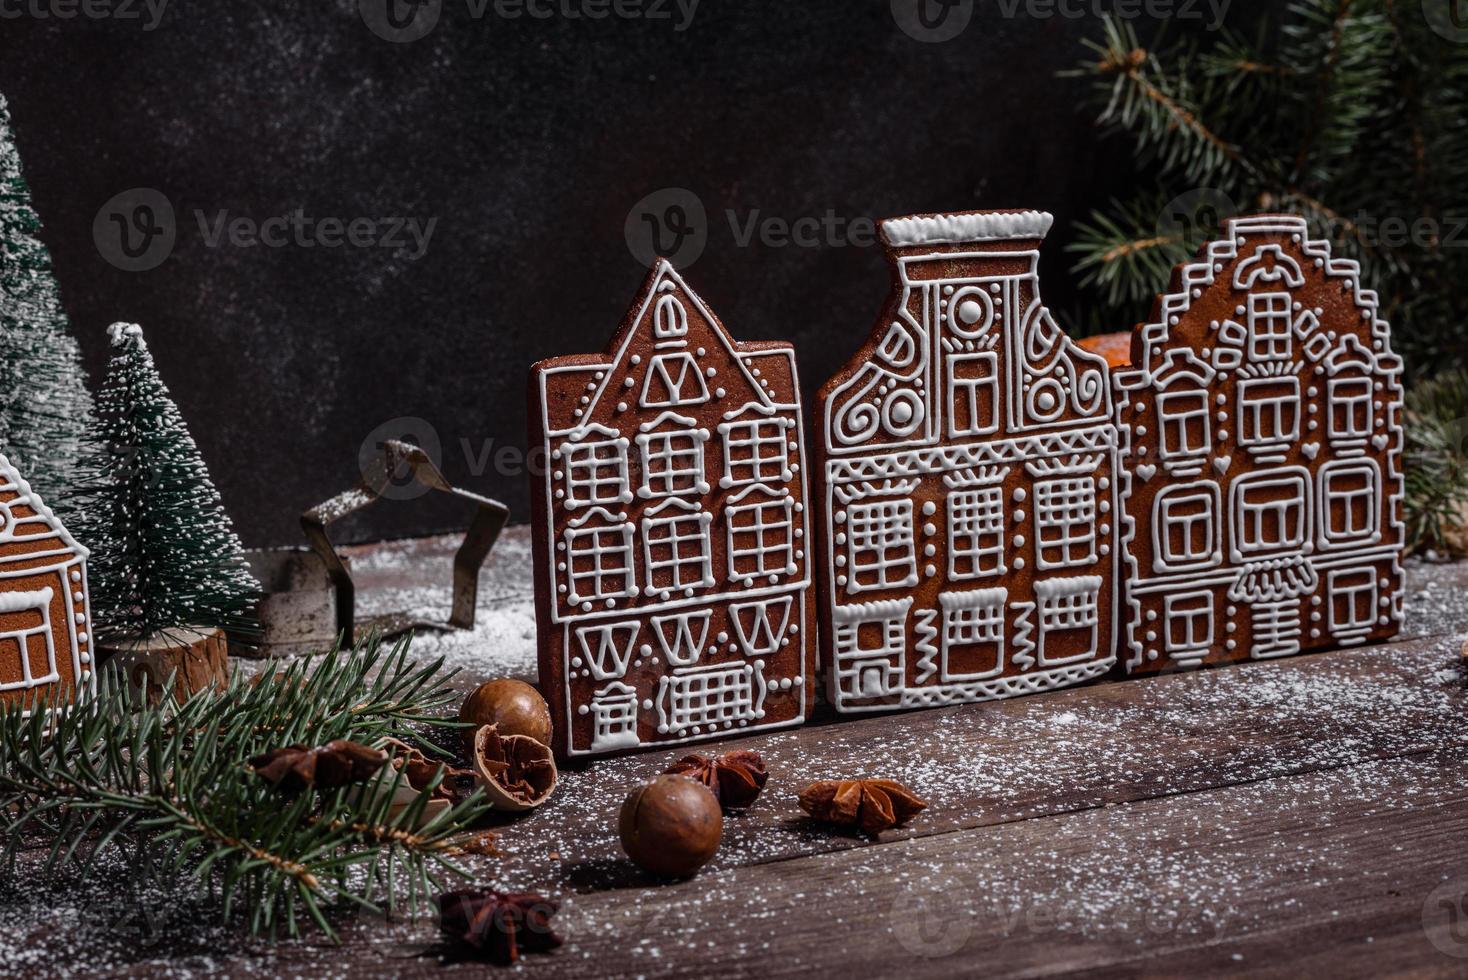 Delicious beautiful sweets on a dark wooden table on Christmas Eve photo